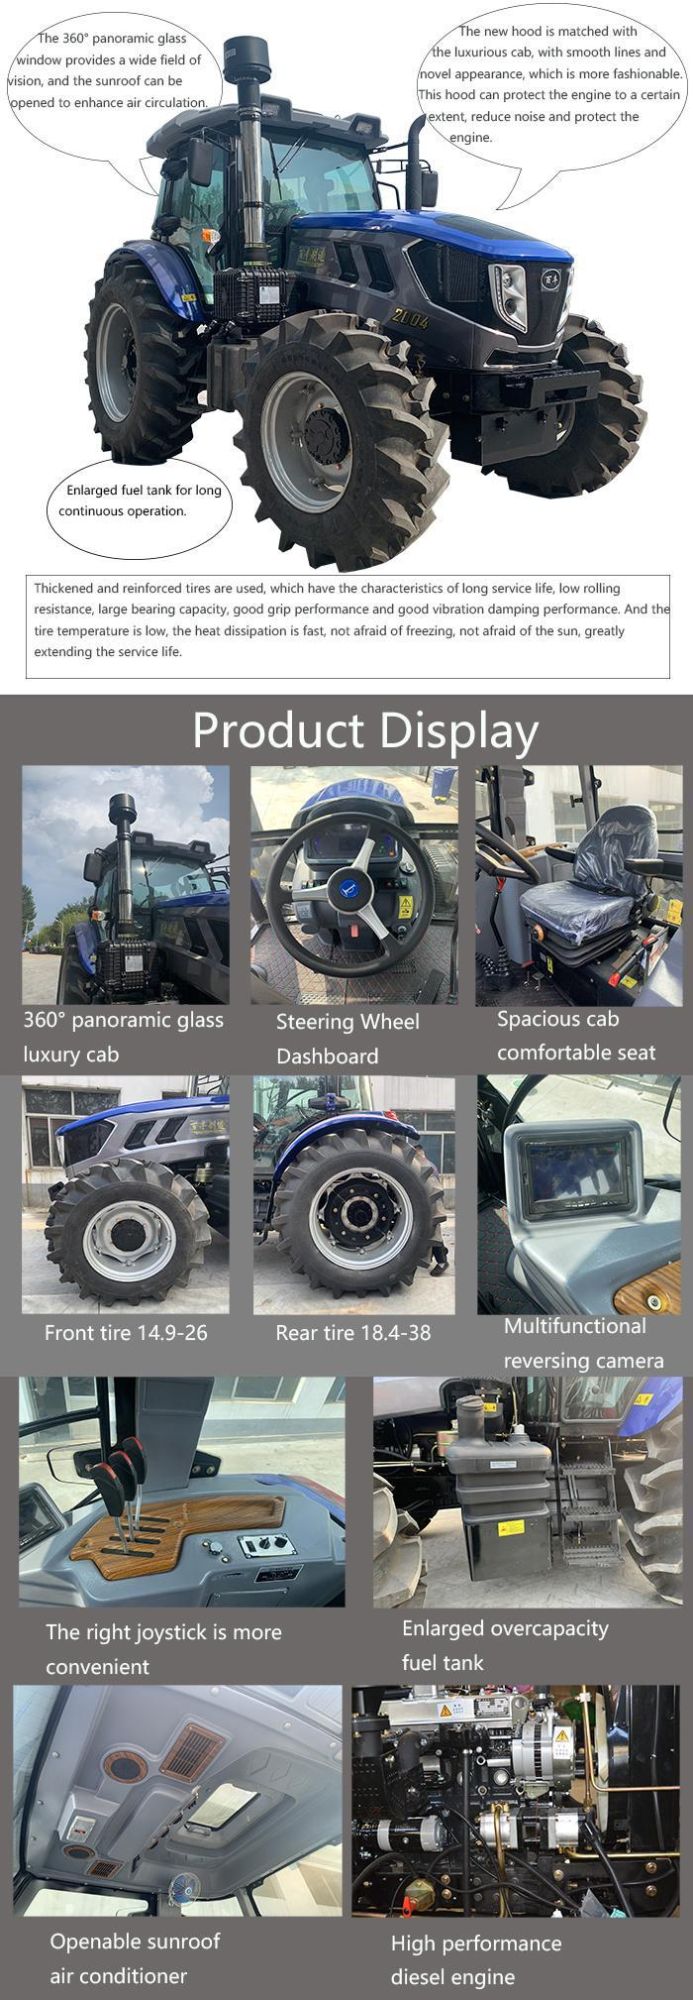 China Machinery Manufacturer Cheap Price Big Farm Tractor /2004 200 HP Tractor/ 4WD Farm Machinery with Cab